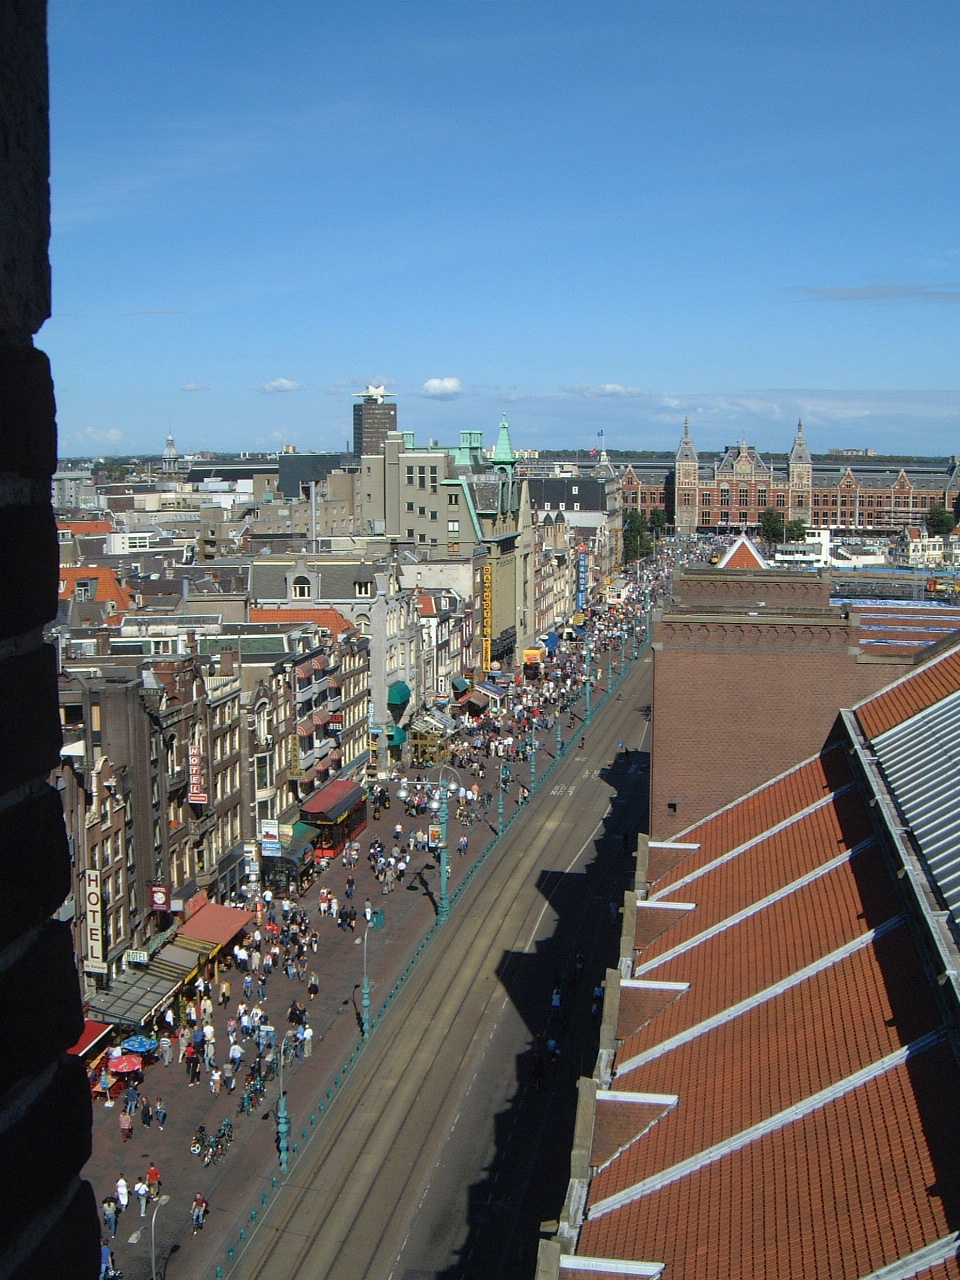 maartent amsterdam cityscape station summer shell city buildings roofs crowd people